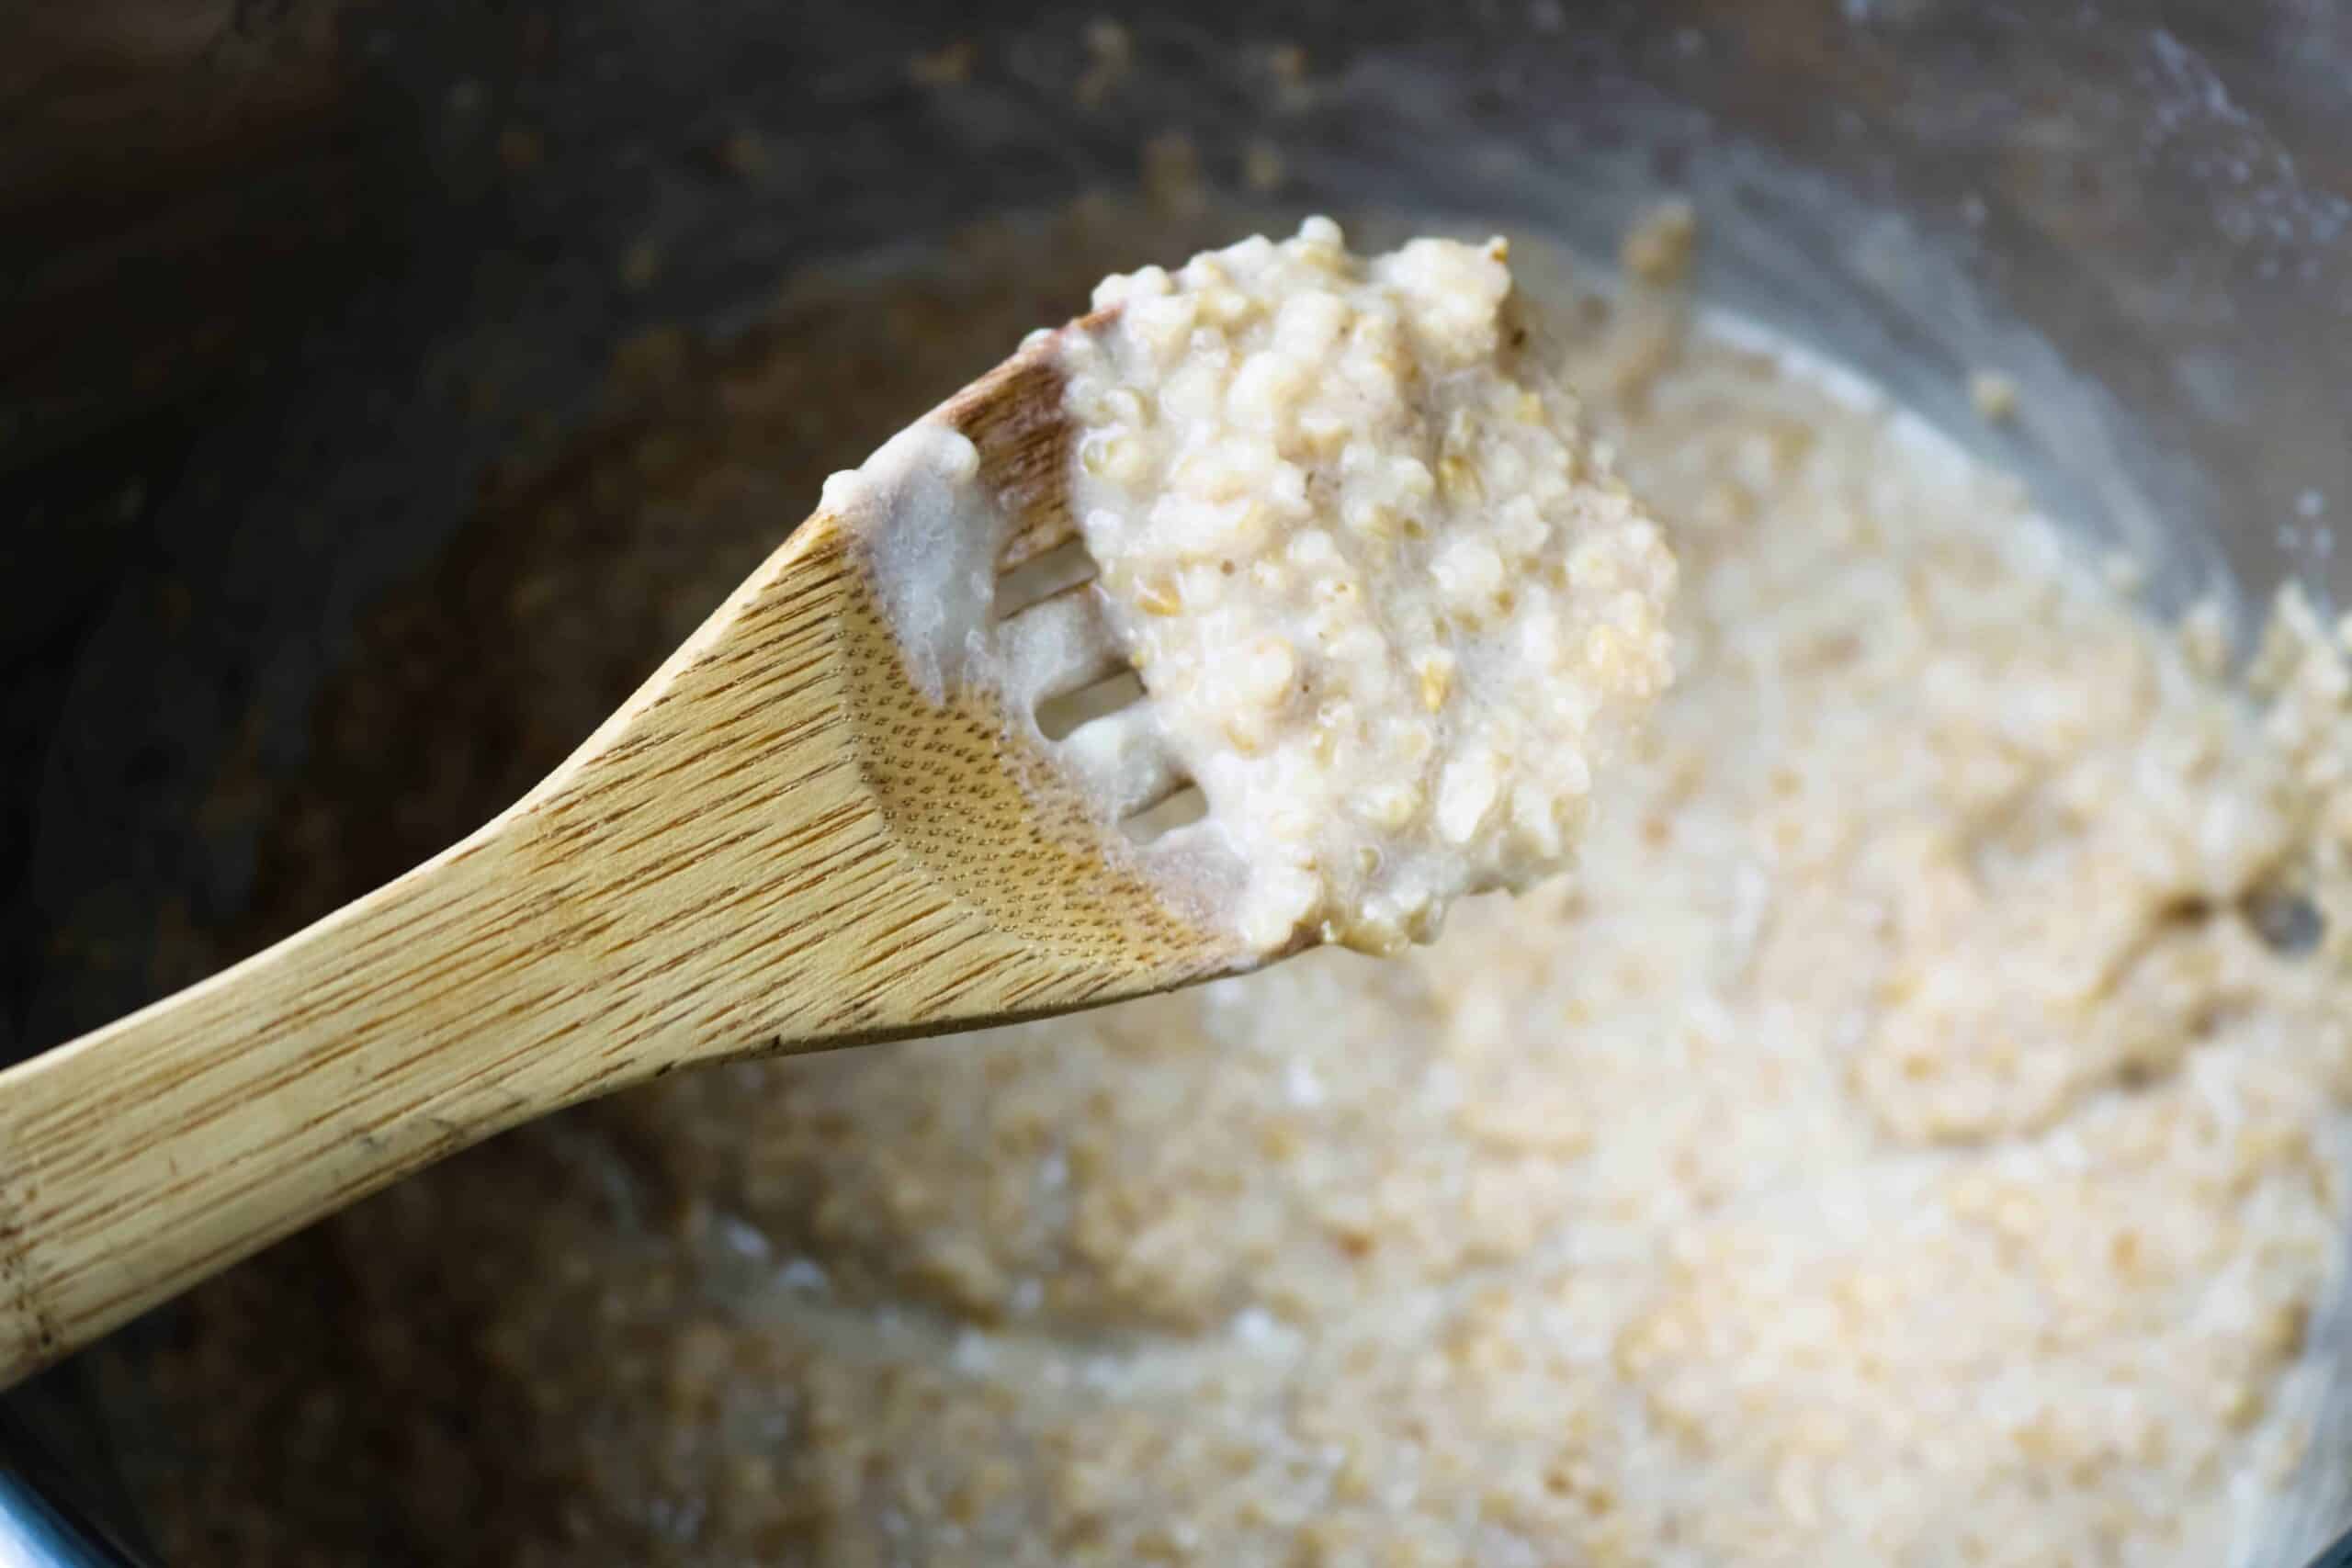 close up of a scoop of the cooked Oatmeal on a wooden spoon